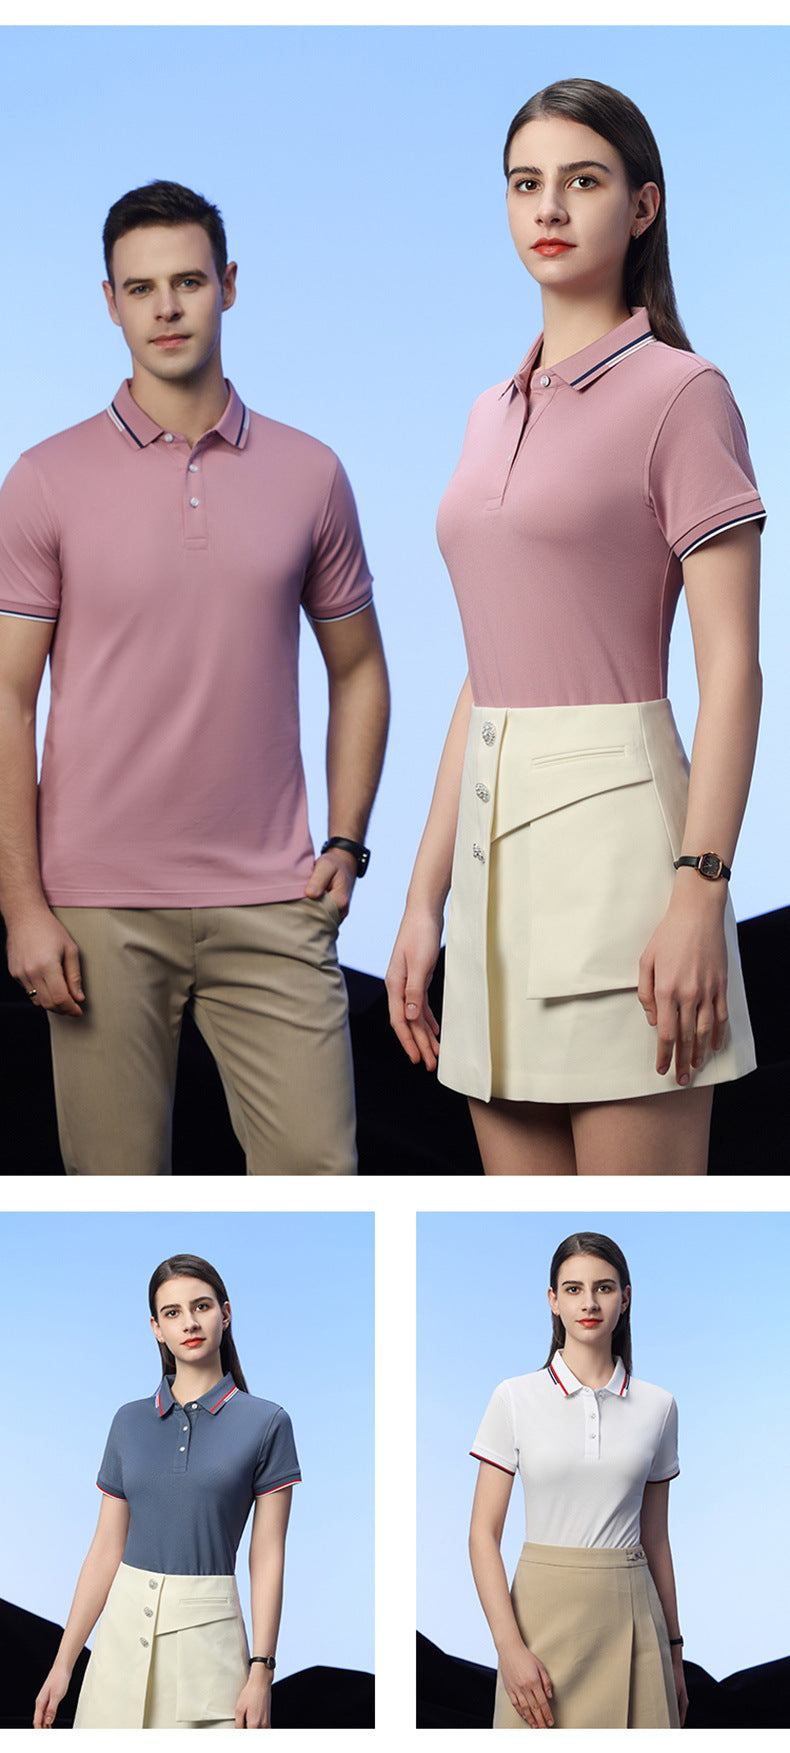 Custom LOGO/Pattern 50% Cotton + 50% Polyester Two Buttons Soft and Breathable Business Polo-shirts For Men and Women (Instock) CST-057 SD33002